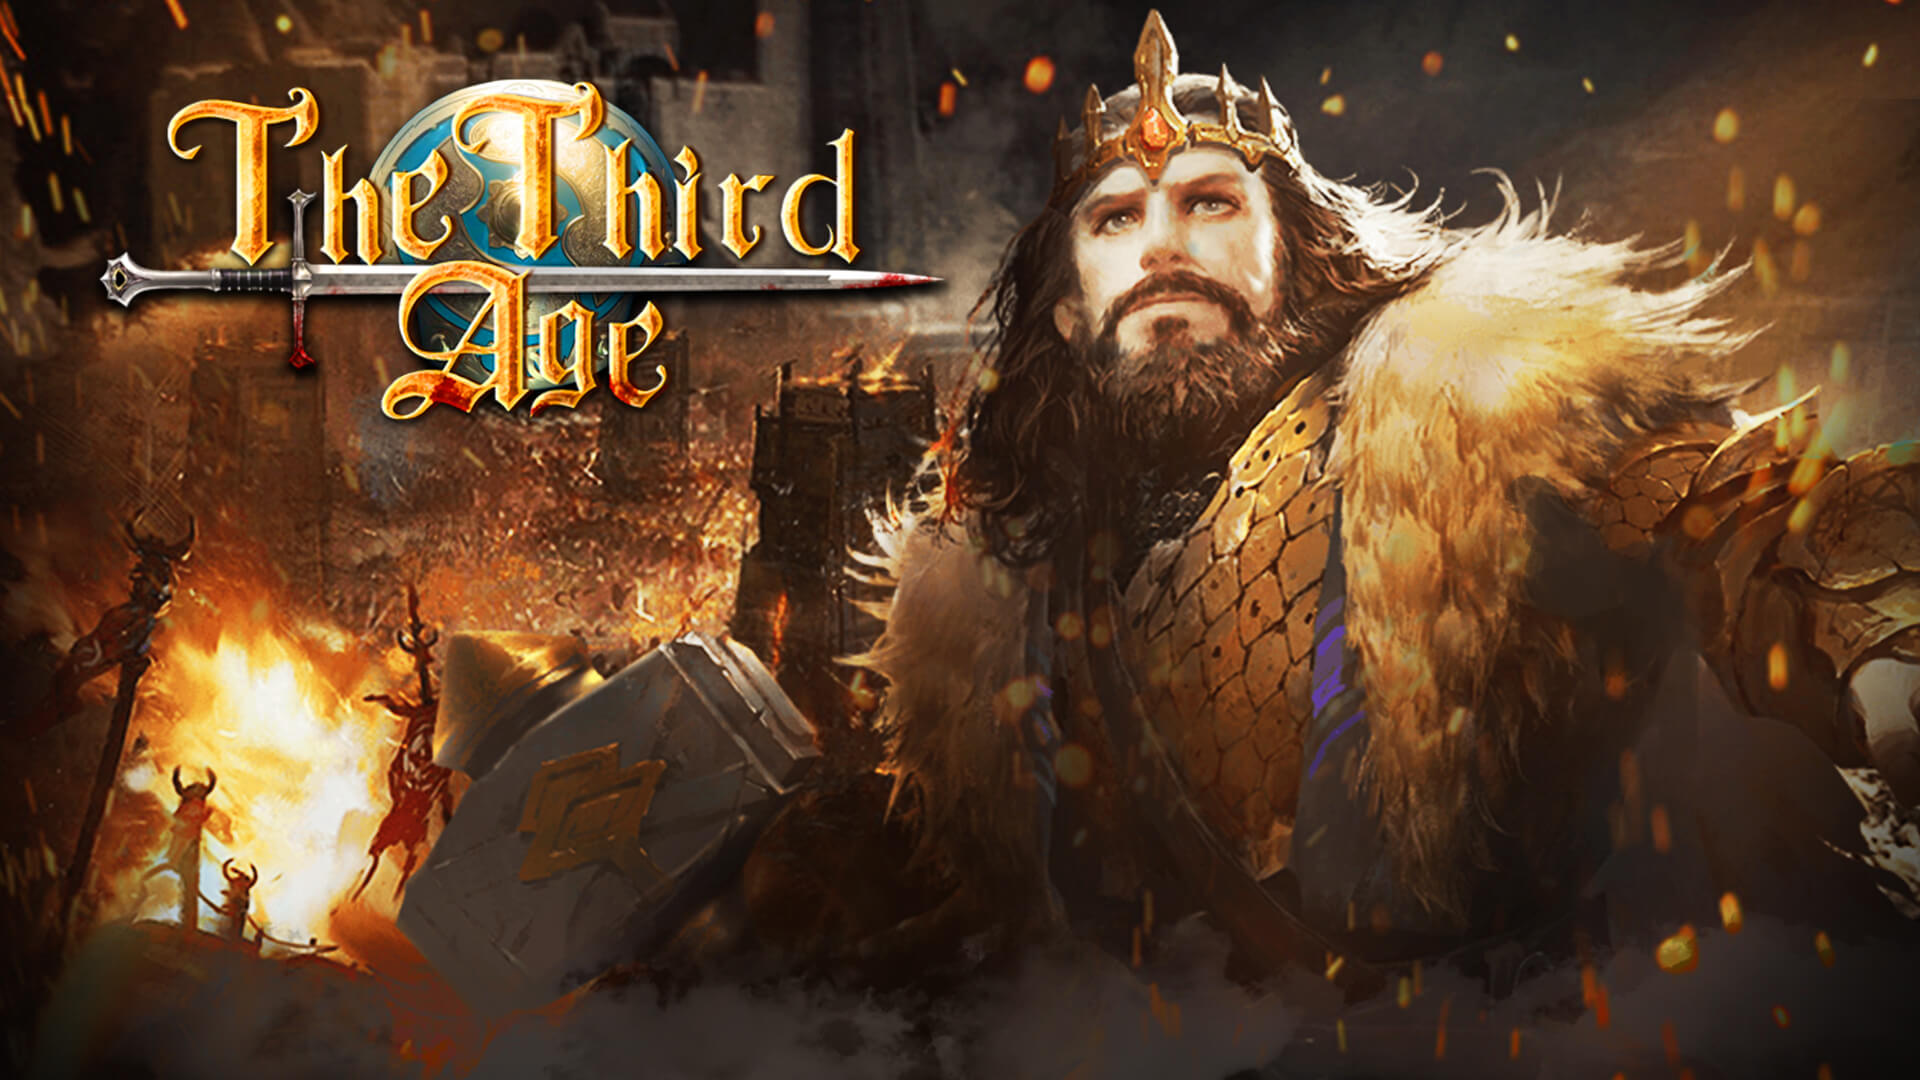 Mobile Version of The Third Age Launches on Android Platform